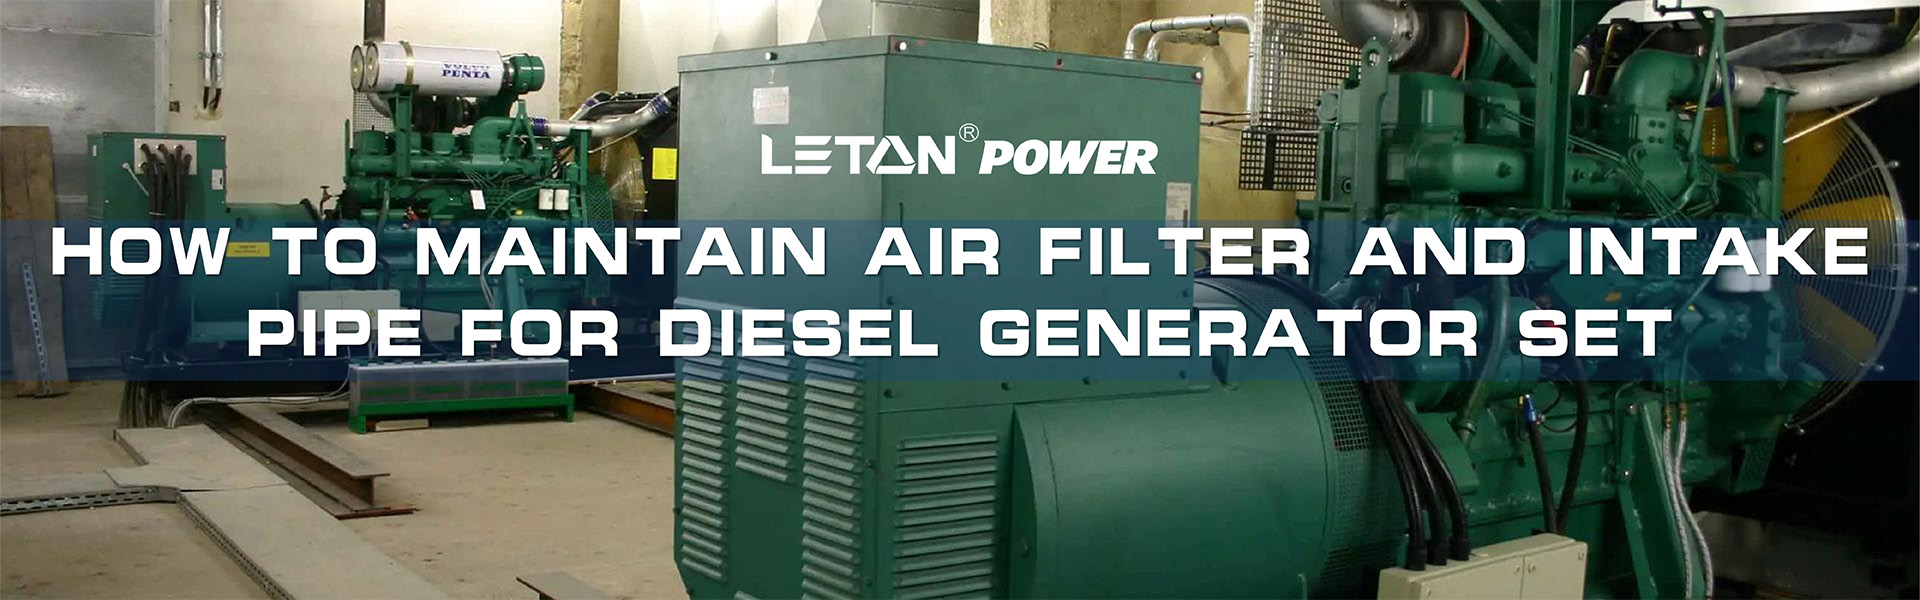 How to maintain air filter and intake pipe for diesel generator set